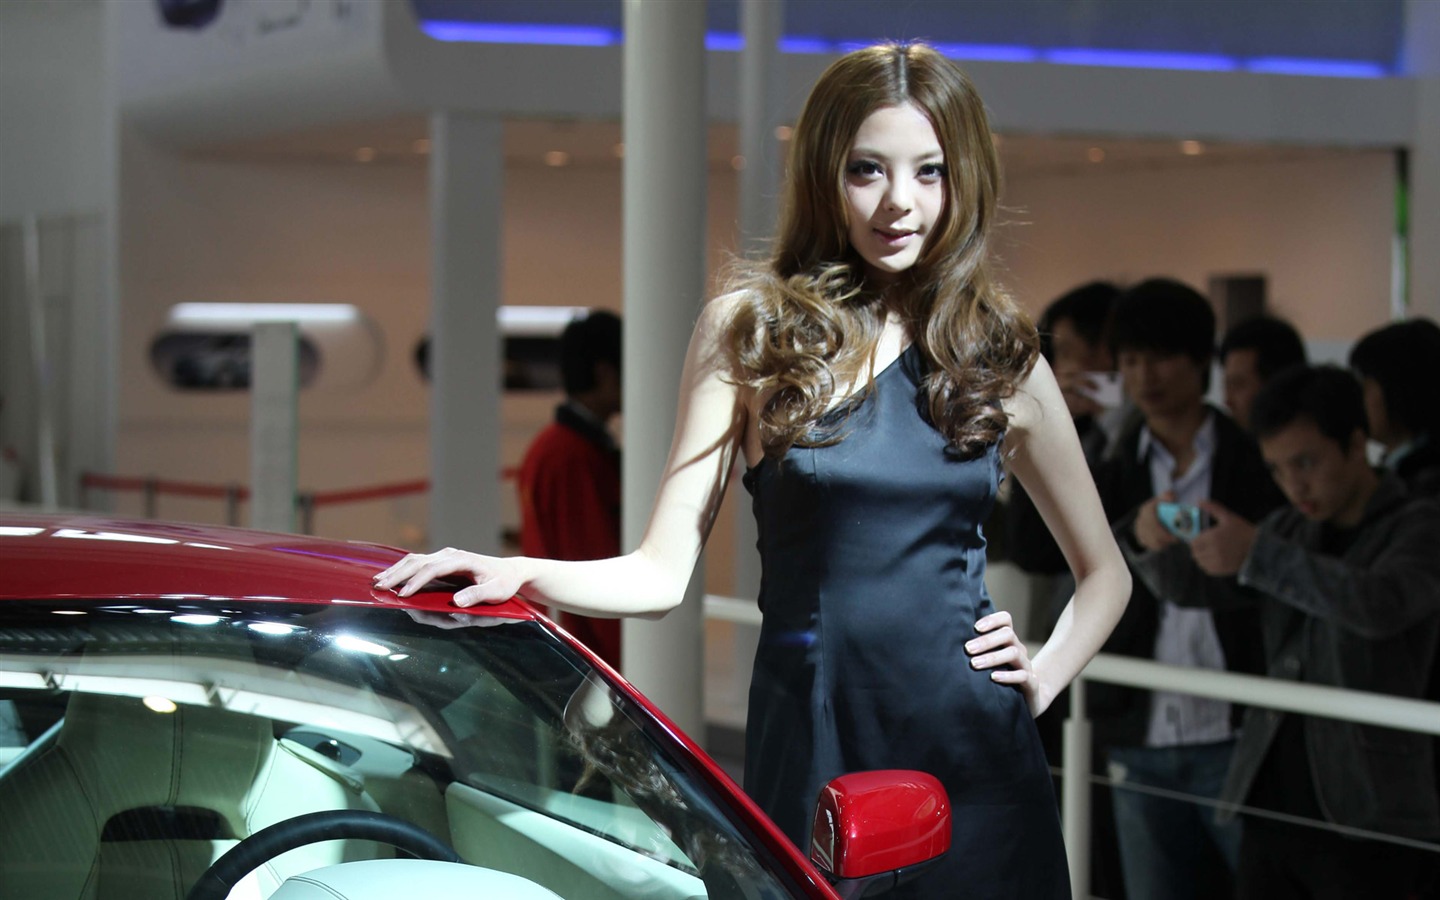 2010 Beijing International Auto Show beauty (1) (the wind chasing the clouds works) #28 - 1440x900